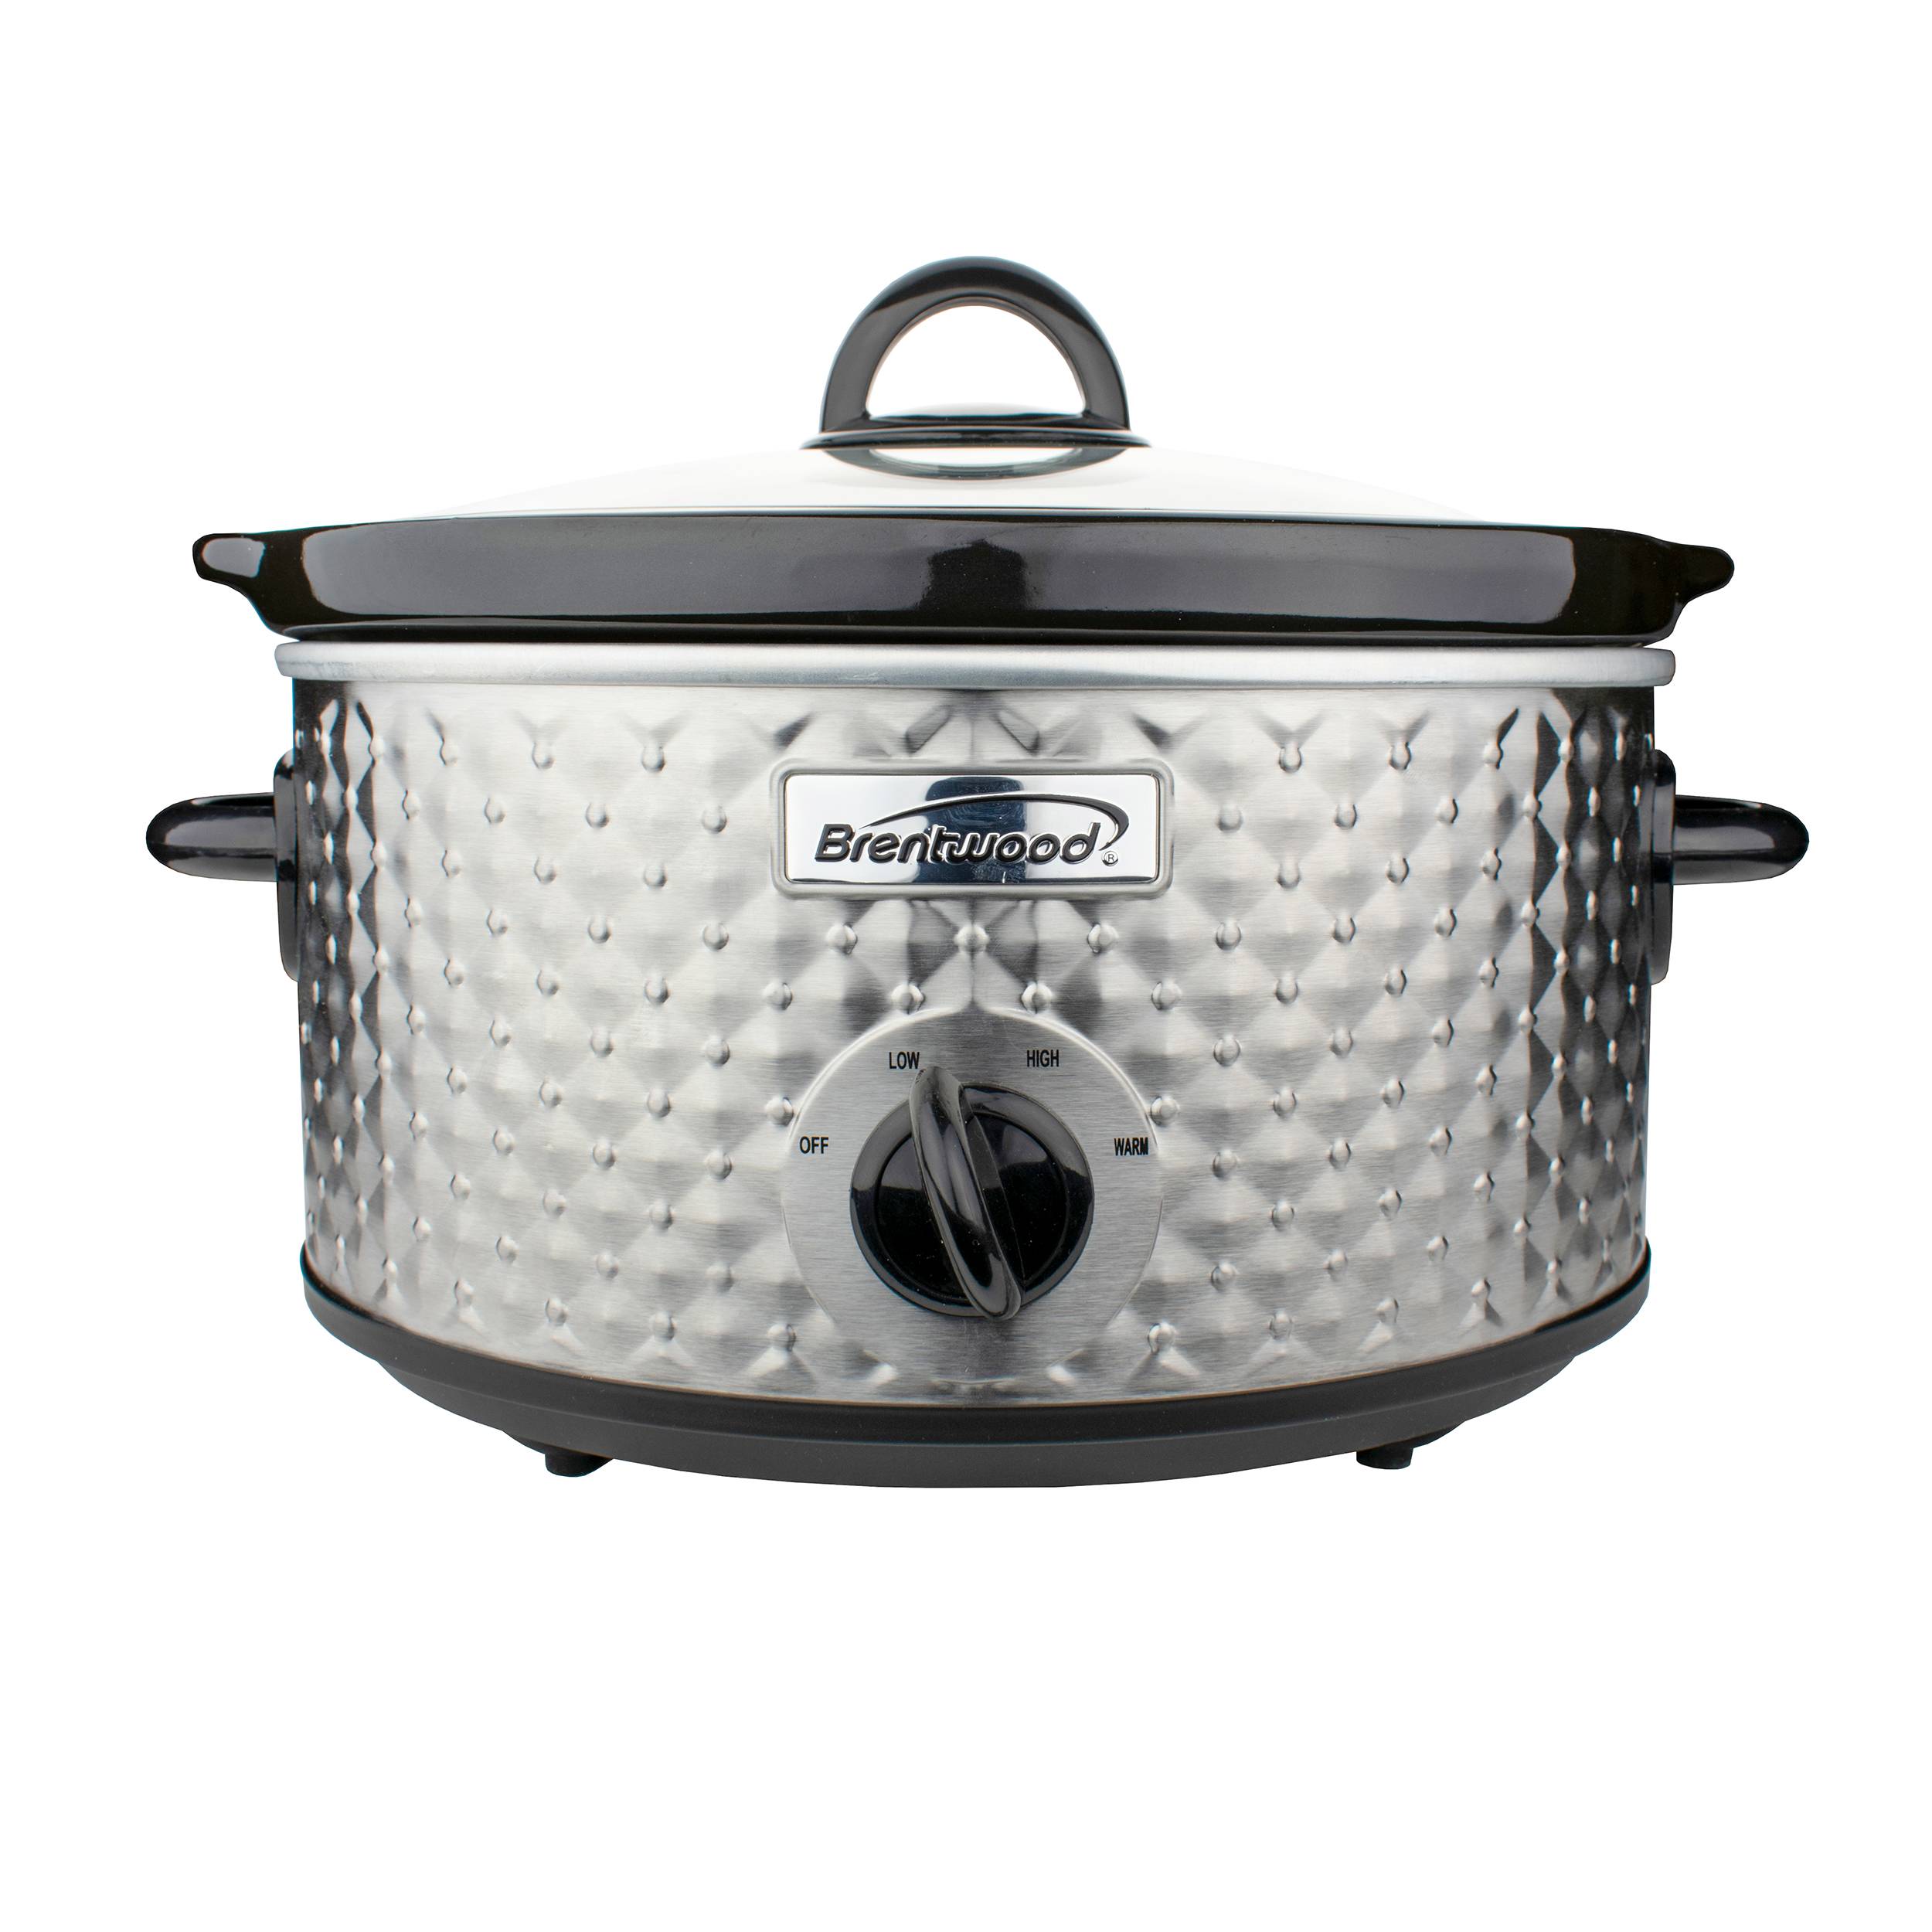 Triple Round Oval 1.5 Quart Stainless Steel Cooker Buffet